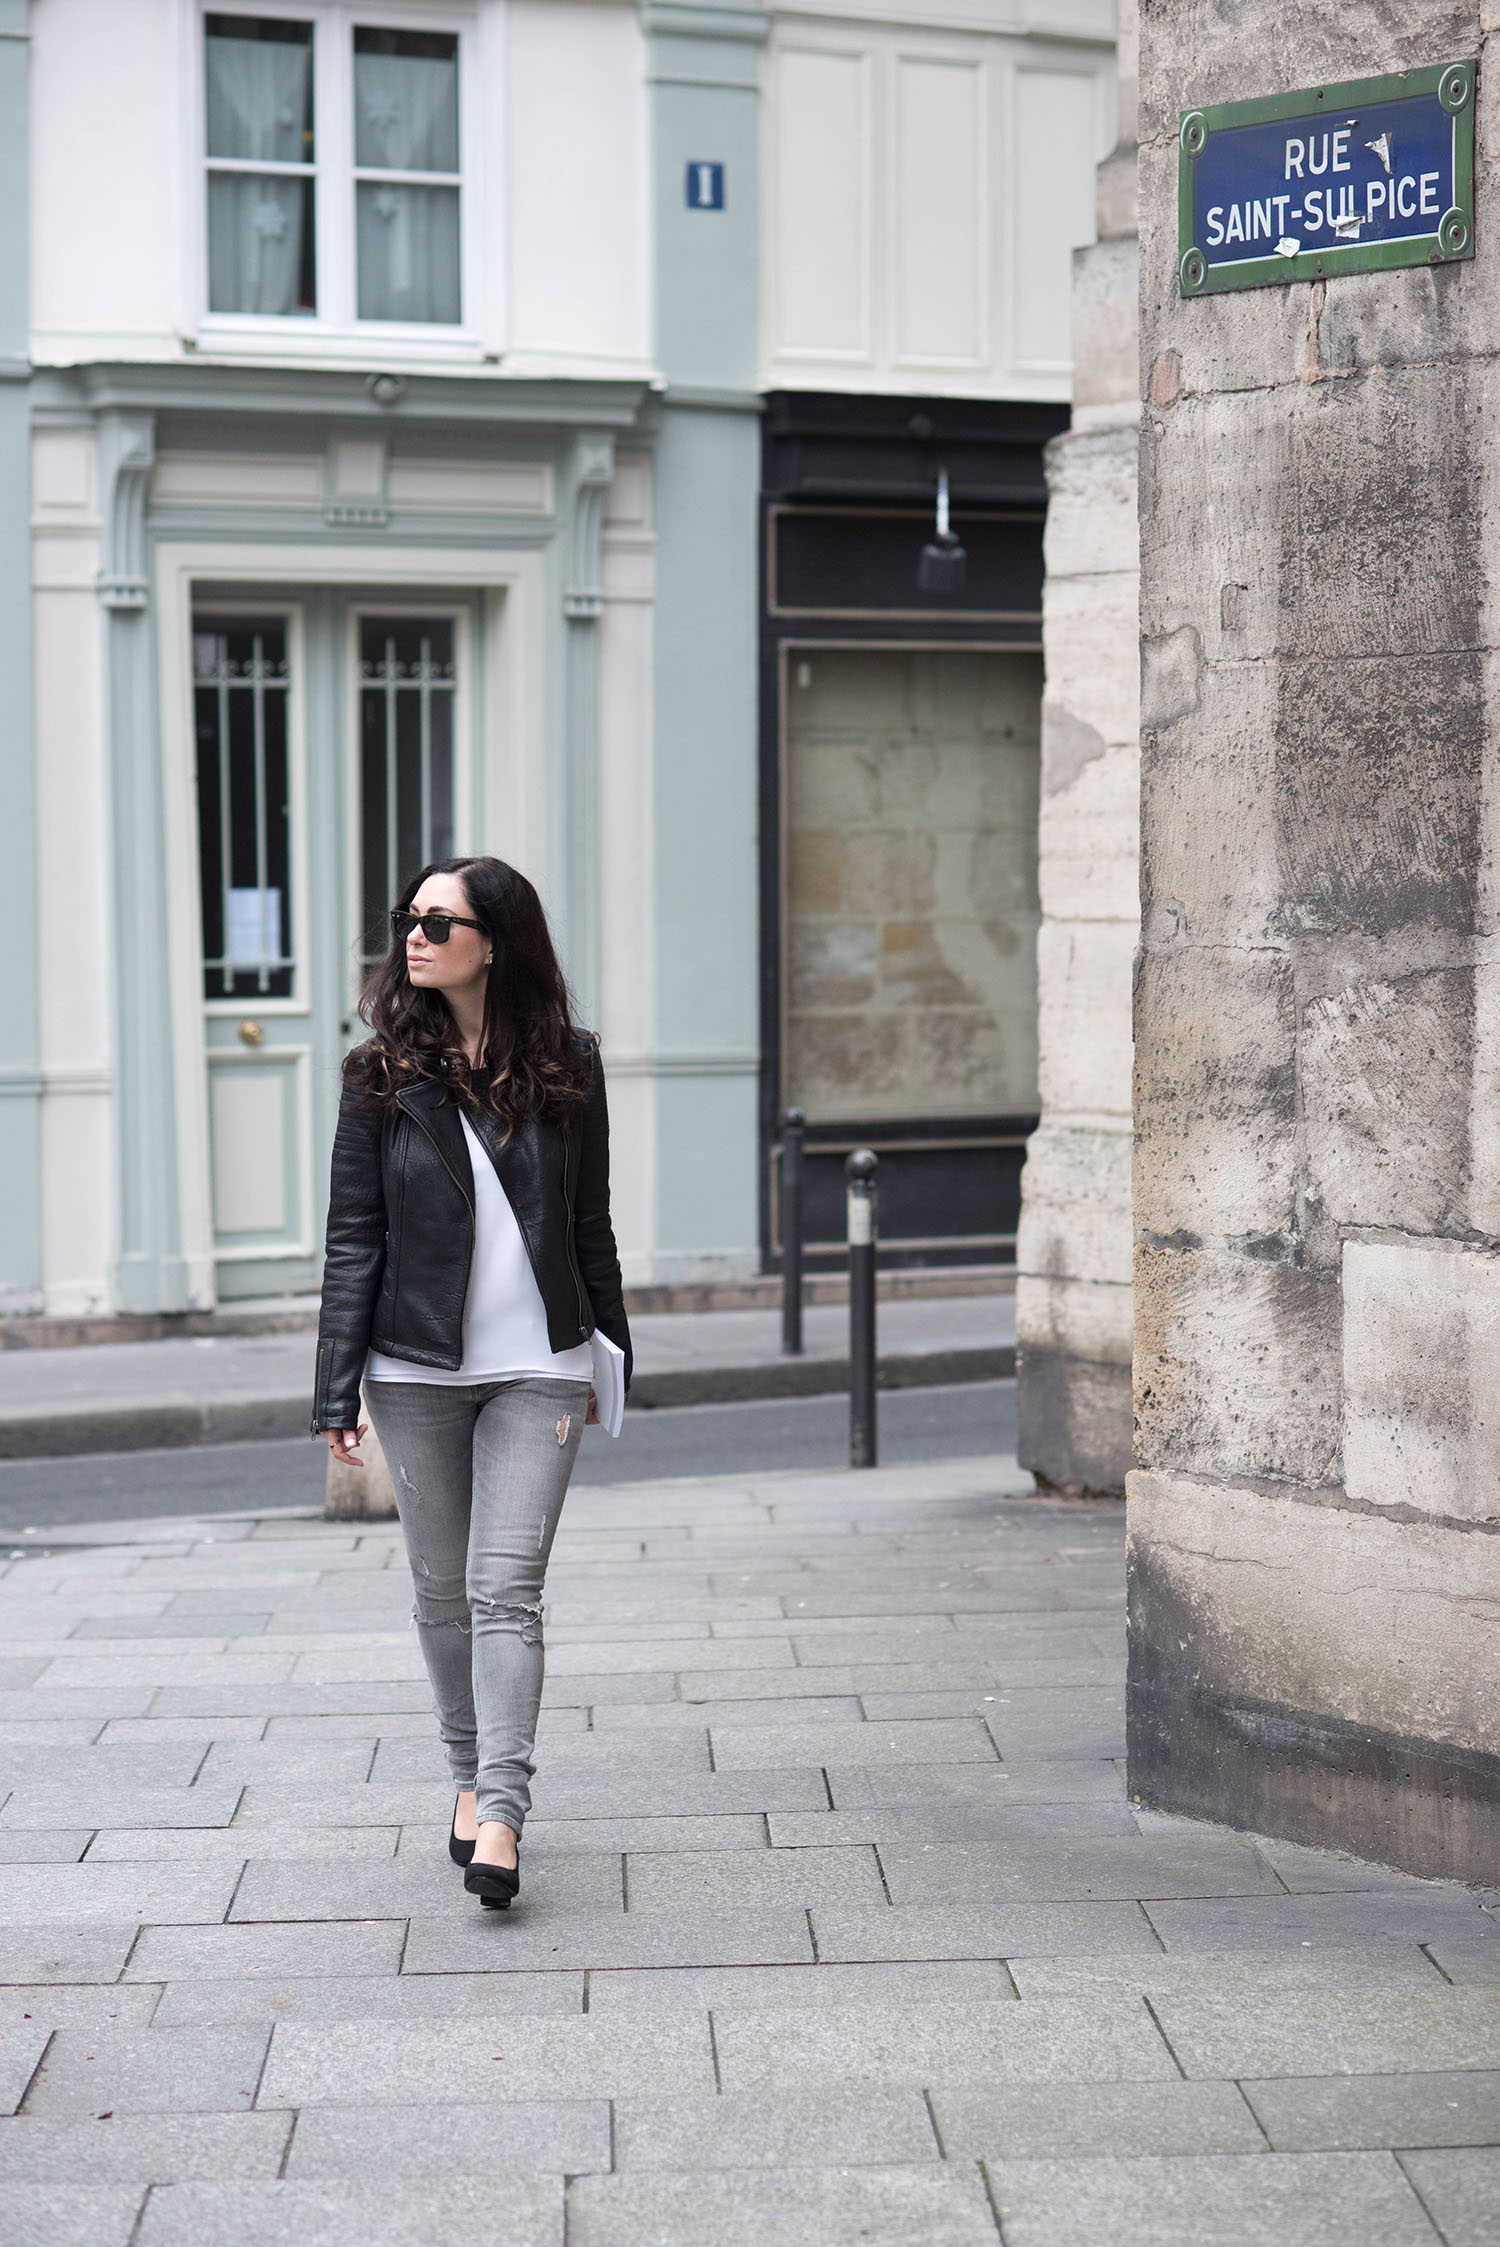 Fashion blogger Cee Fardoe of Coco & Vera wears Zara jeans and a leather jacket in Paris